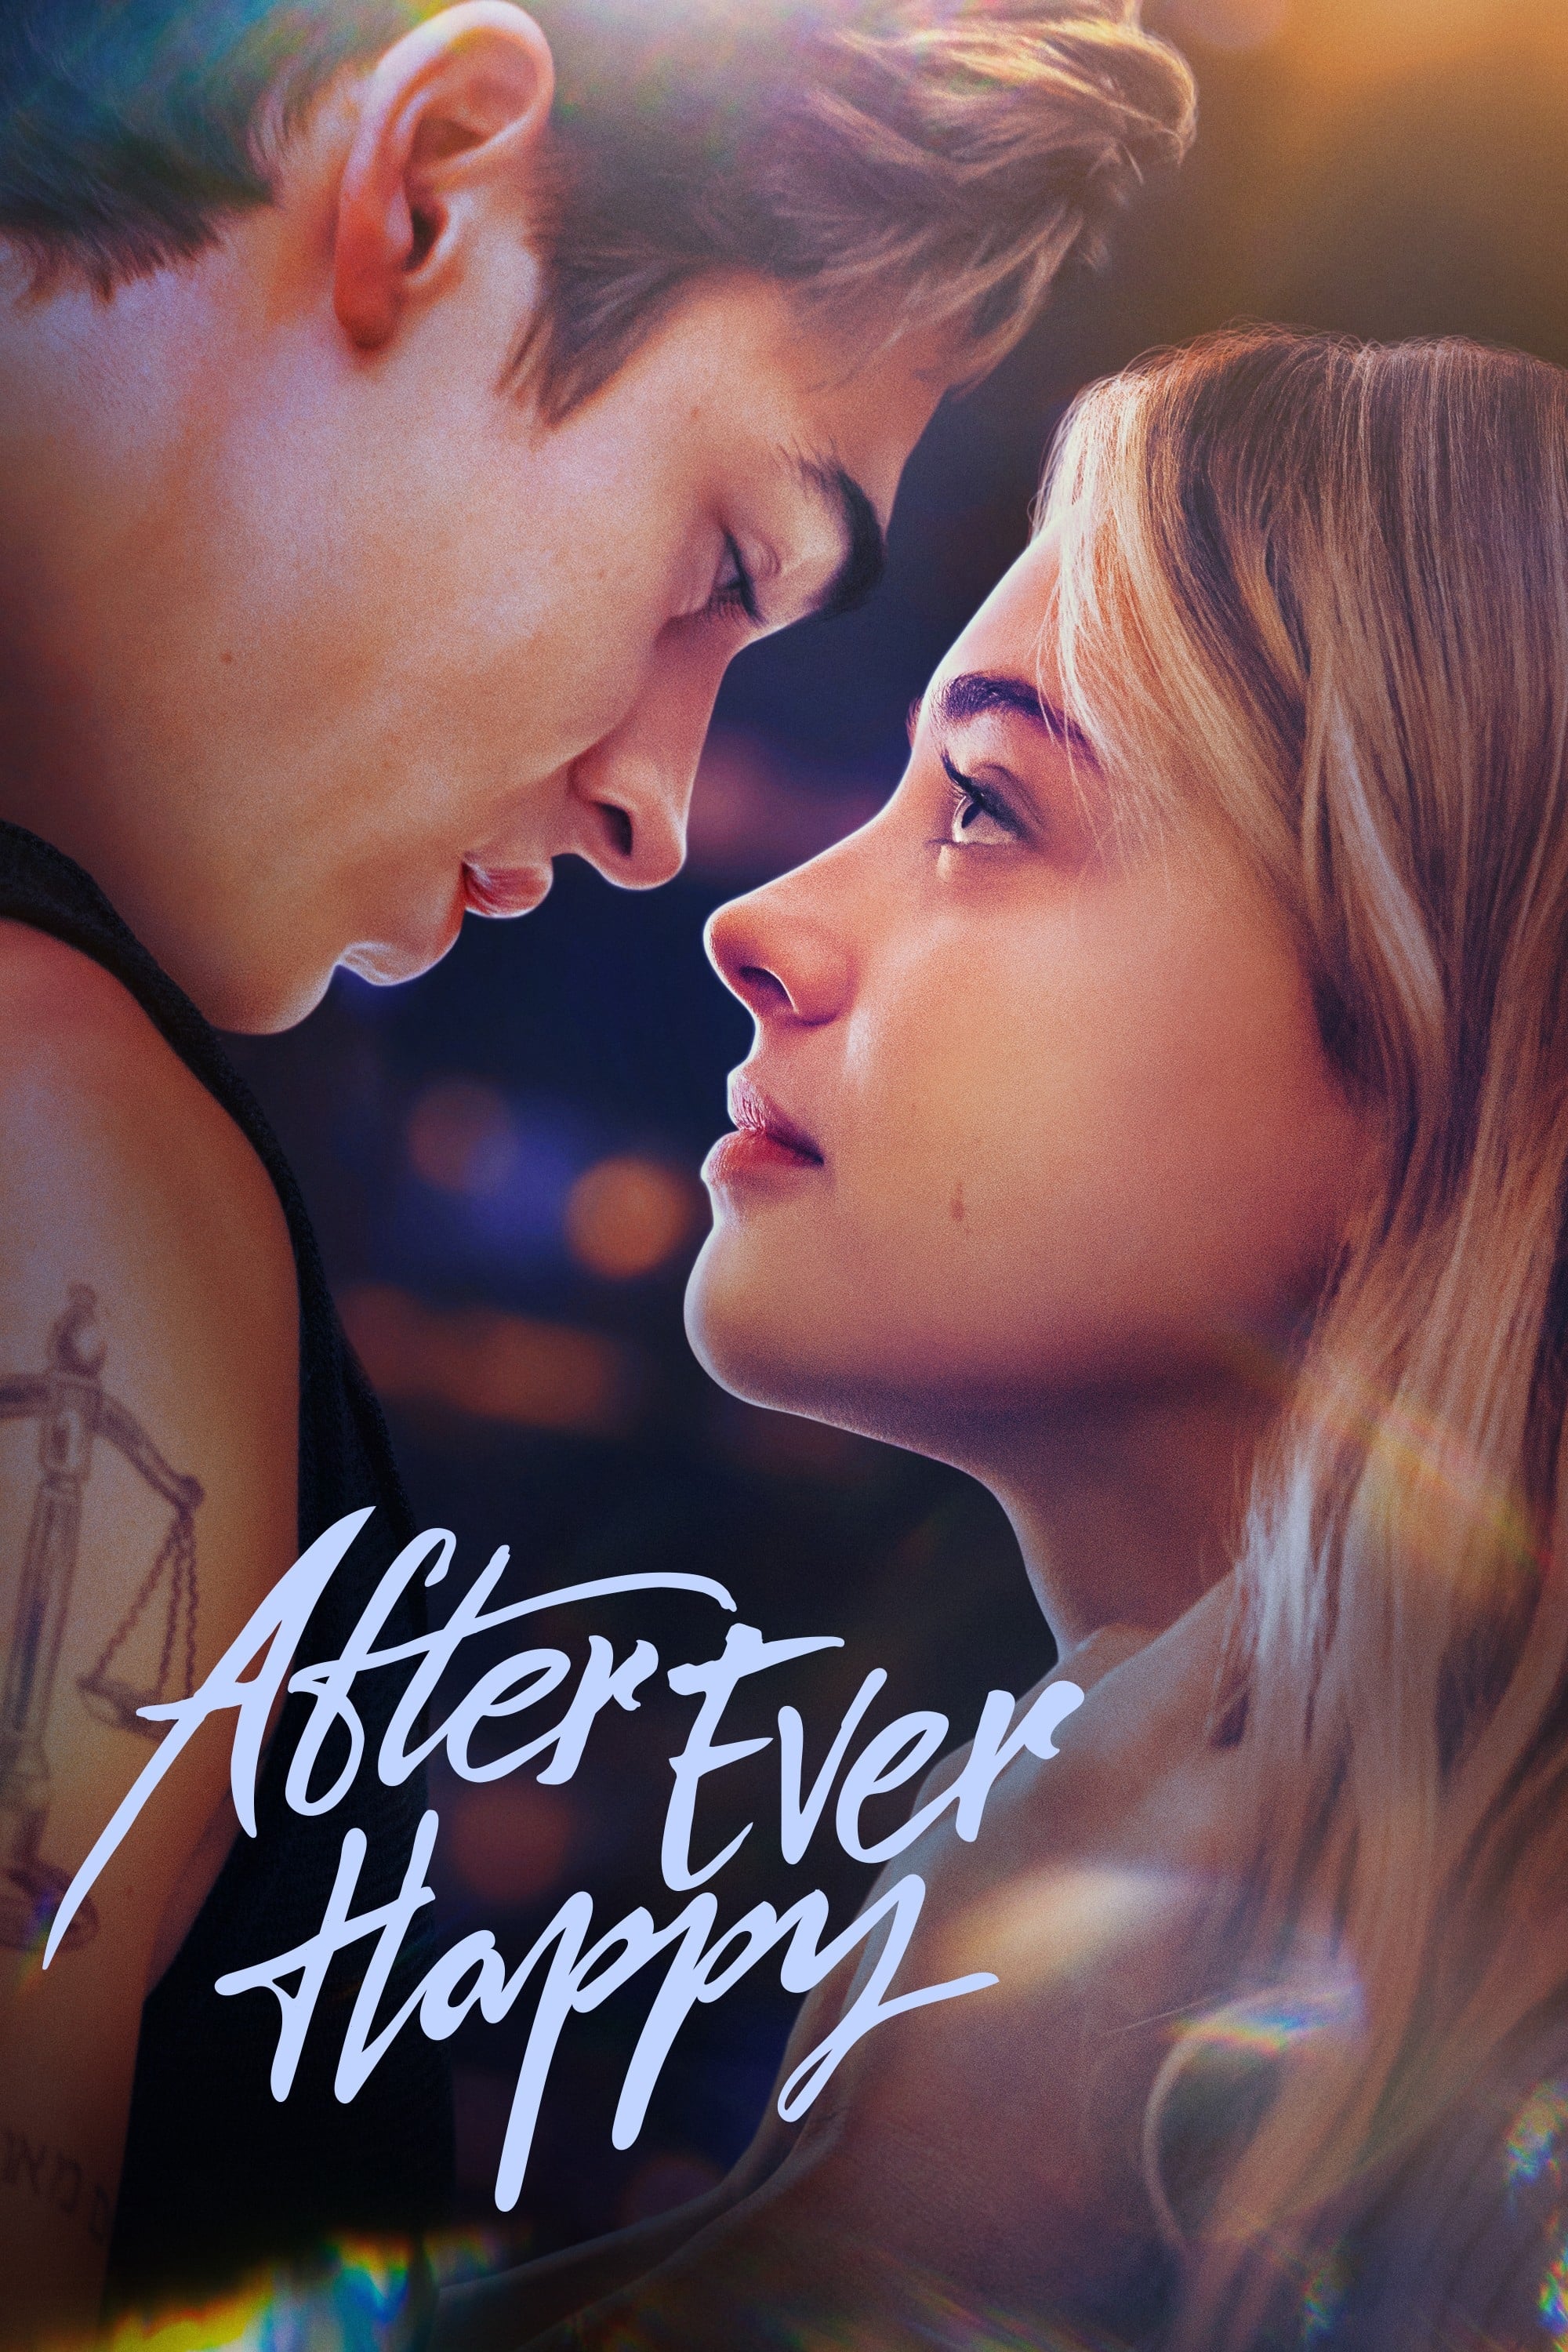 After. Amor infinito (2022)